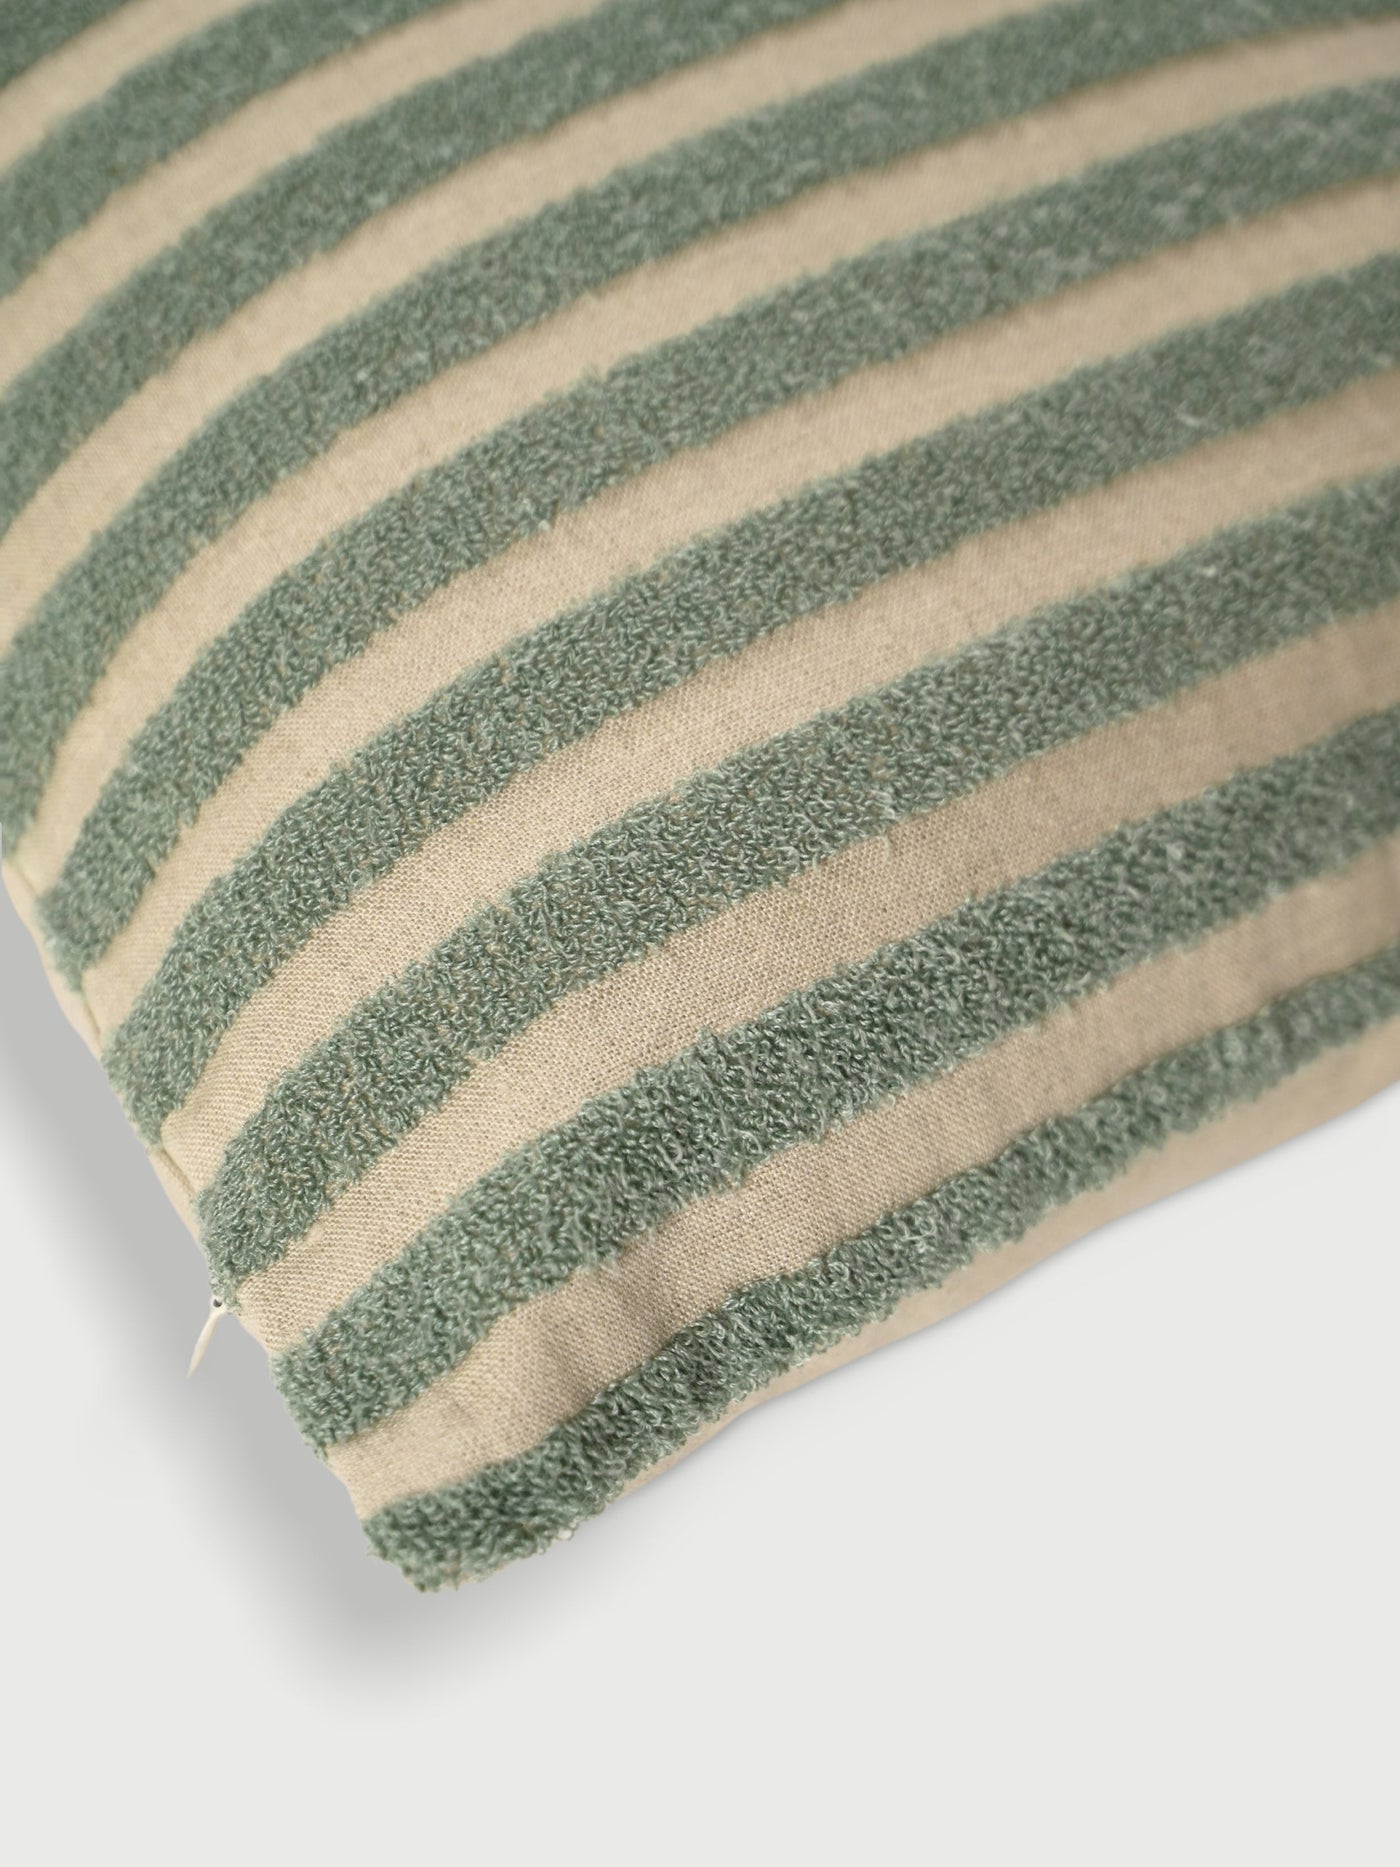 Stripe Embroidered Linen Cushion Cover